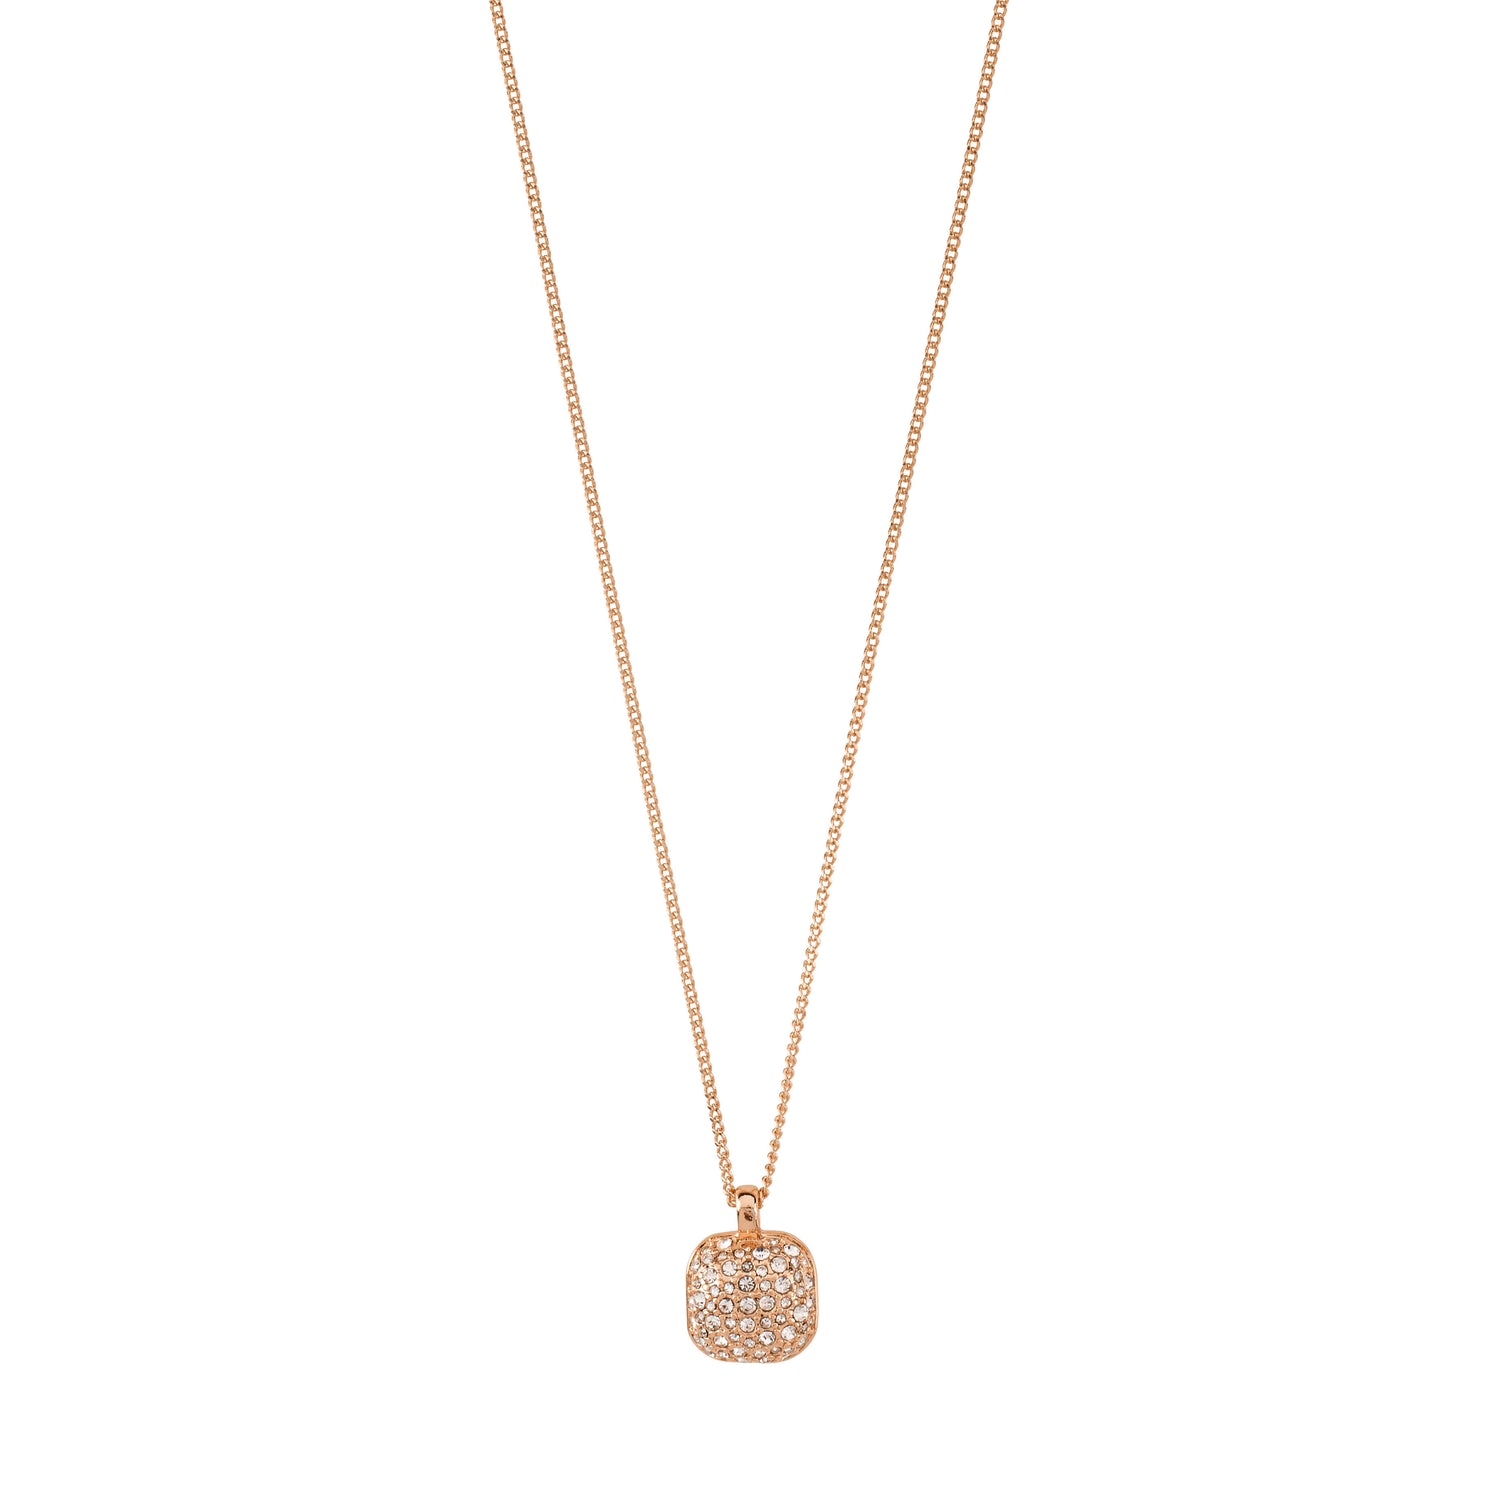 Rose gold plated necklaces